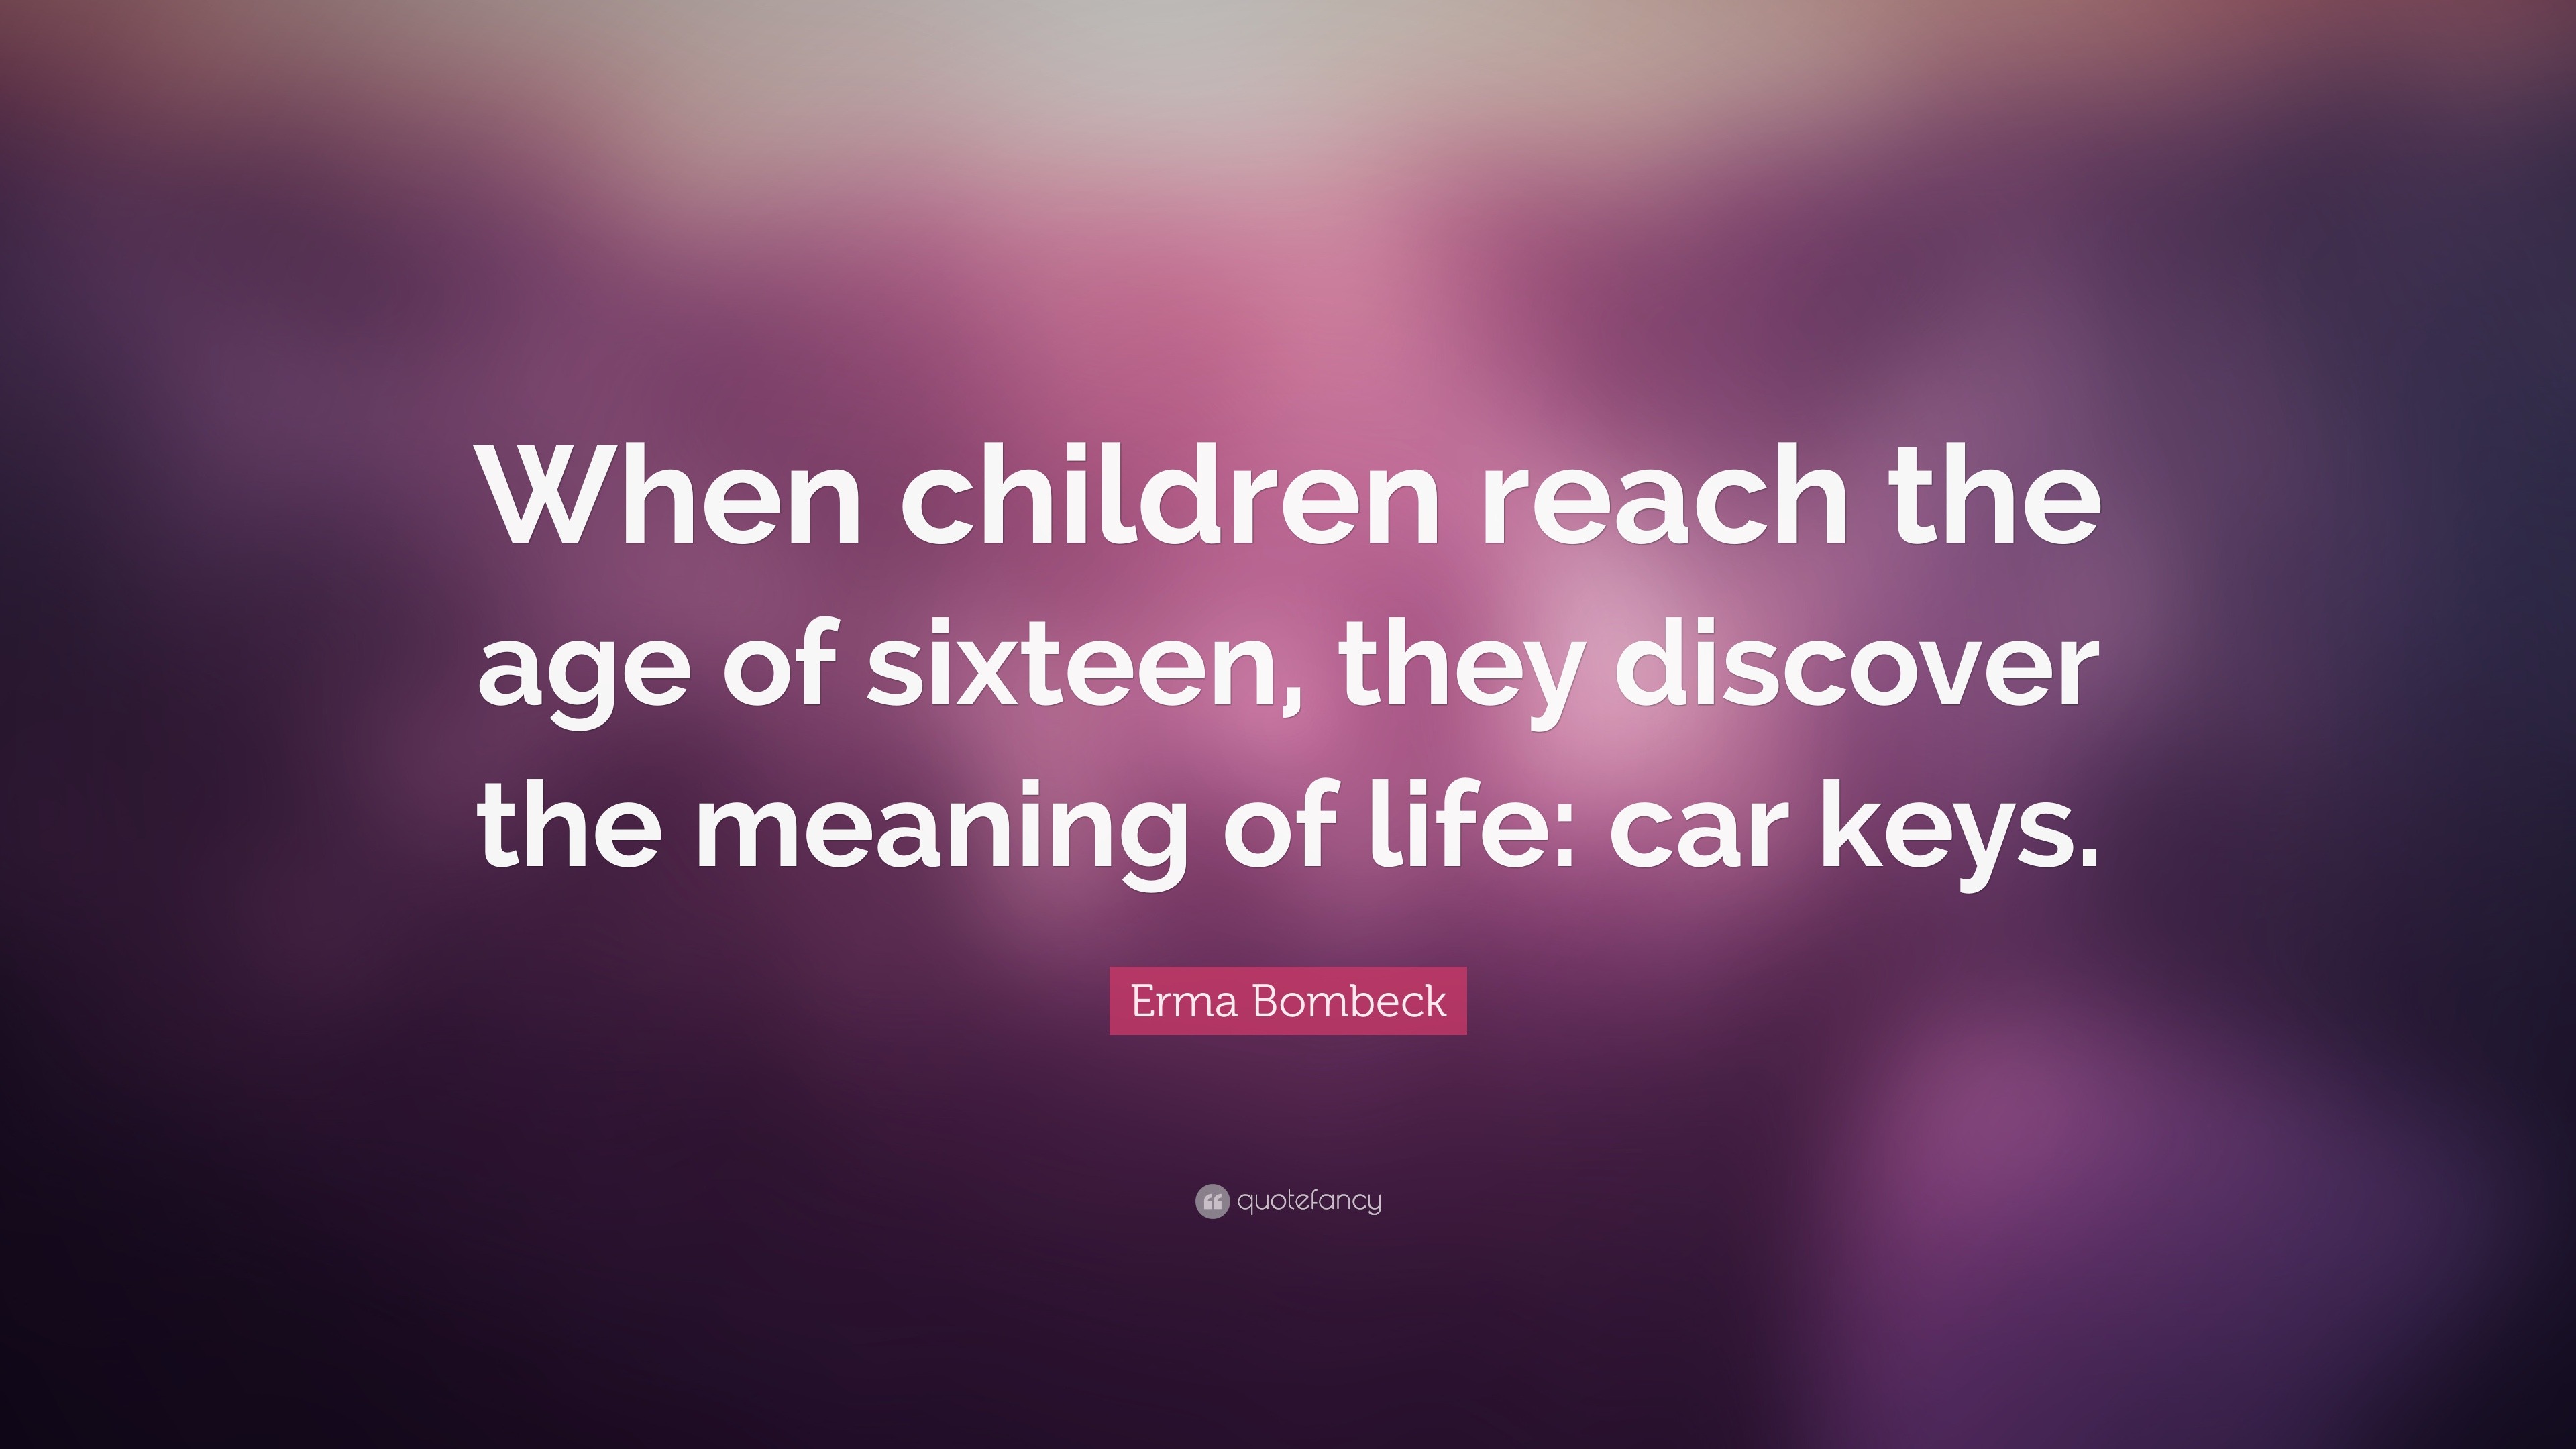 249594 Erma Bombeck Quote When children reach the age of sixteen they